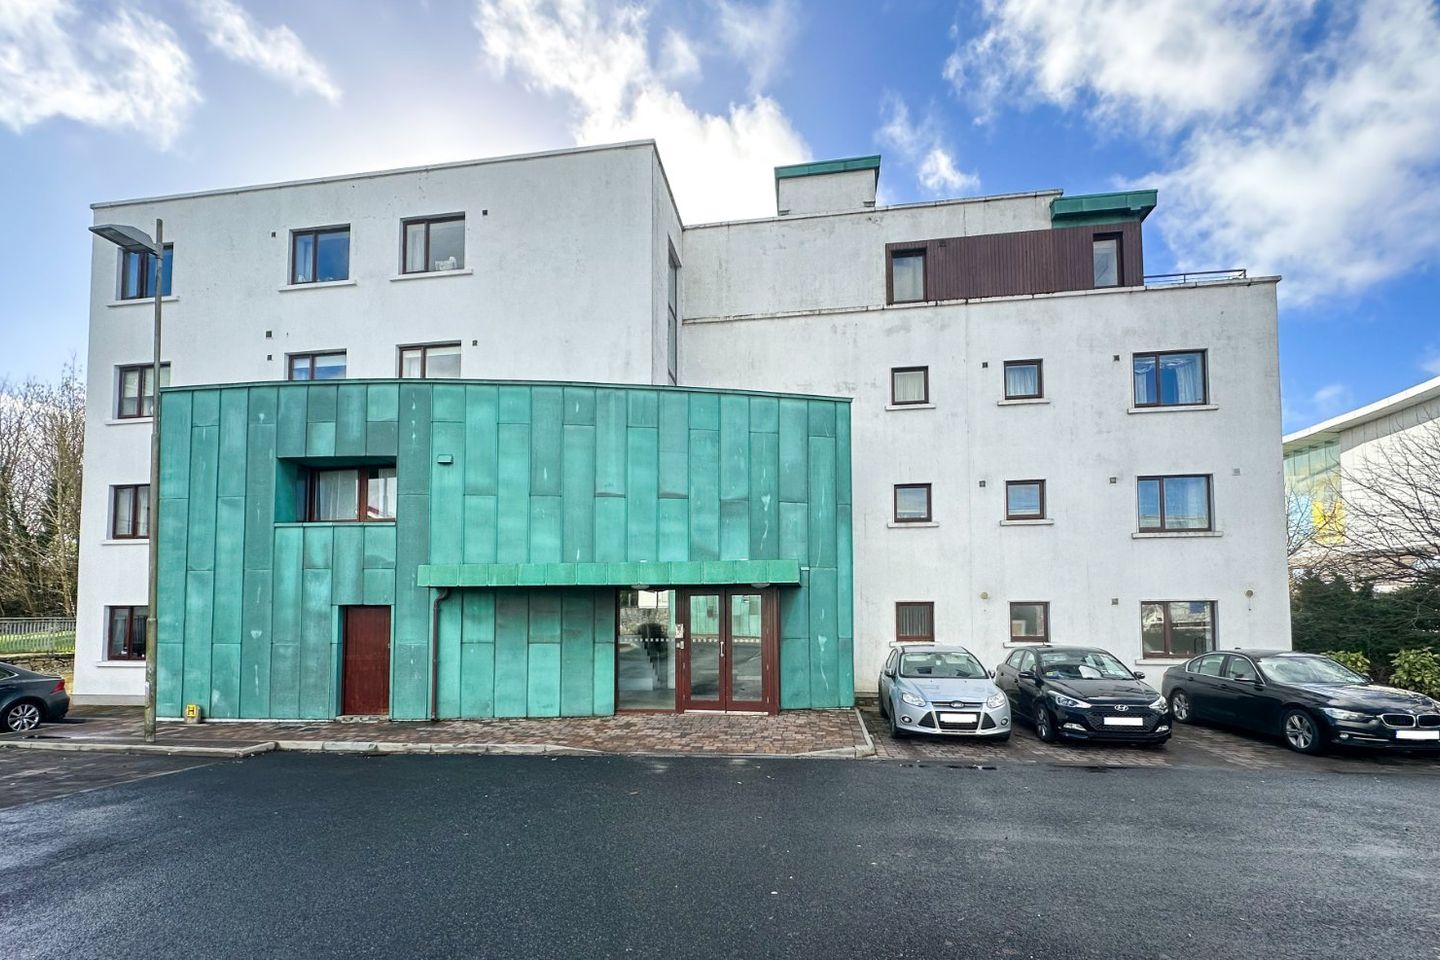 6 Sailin, Wellpark, Galway City, Co. Galway, H91A996